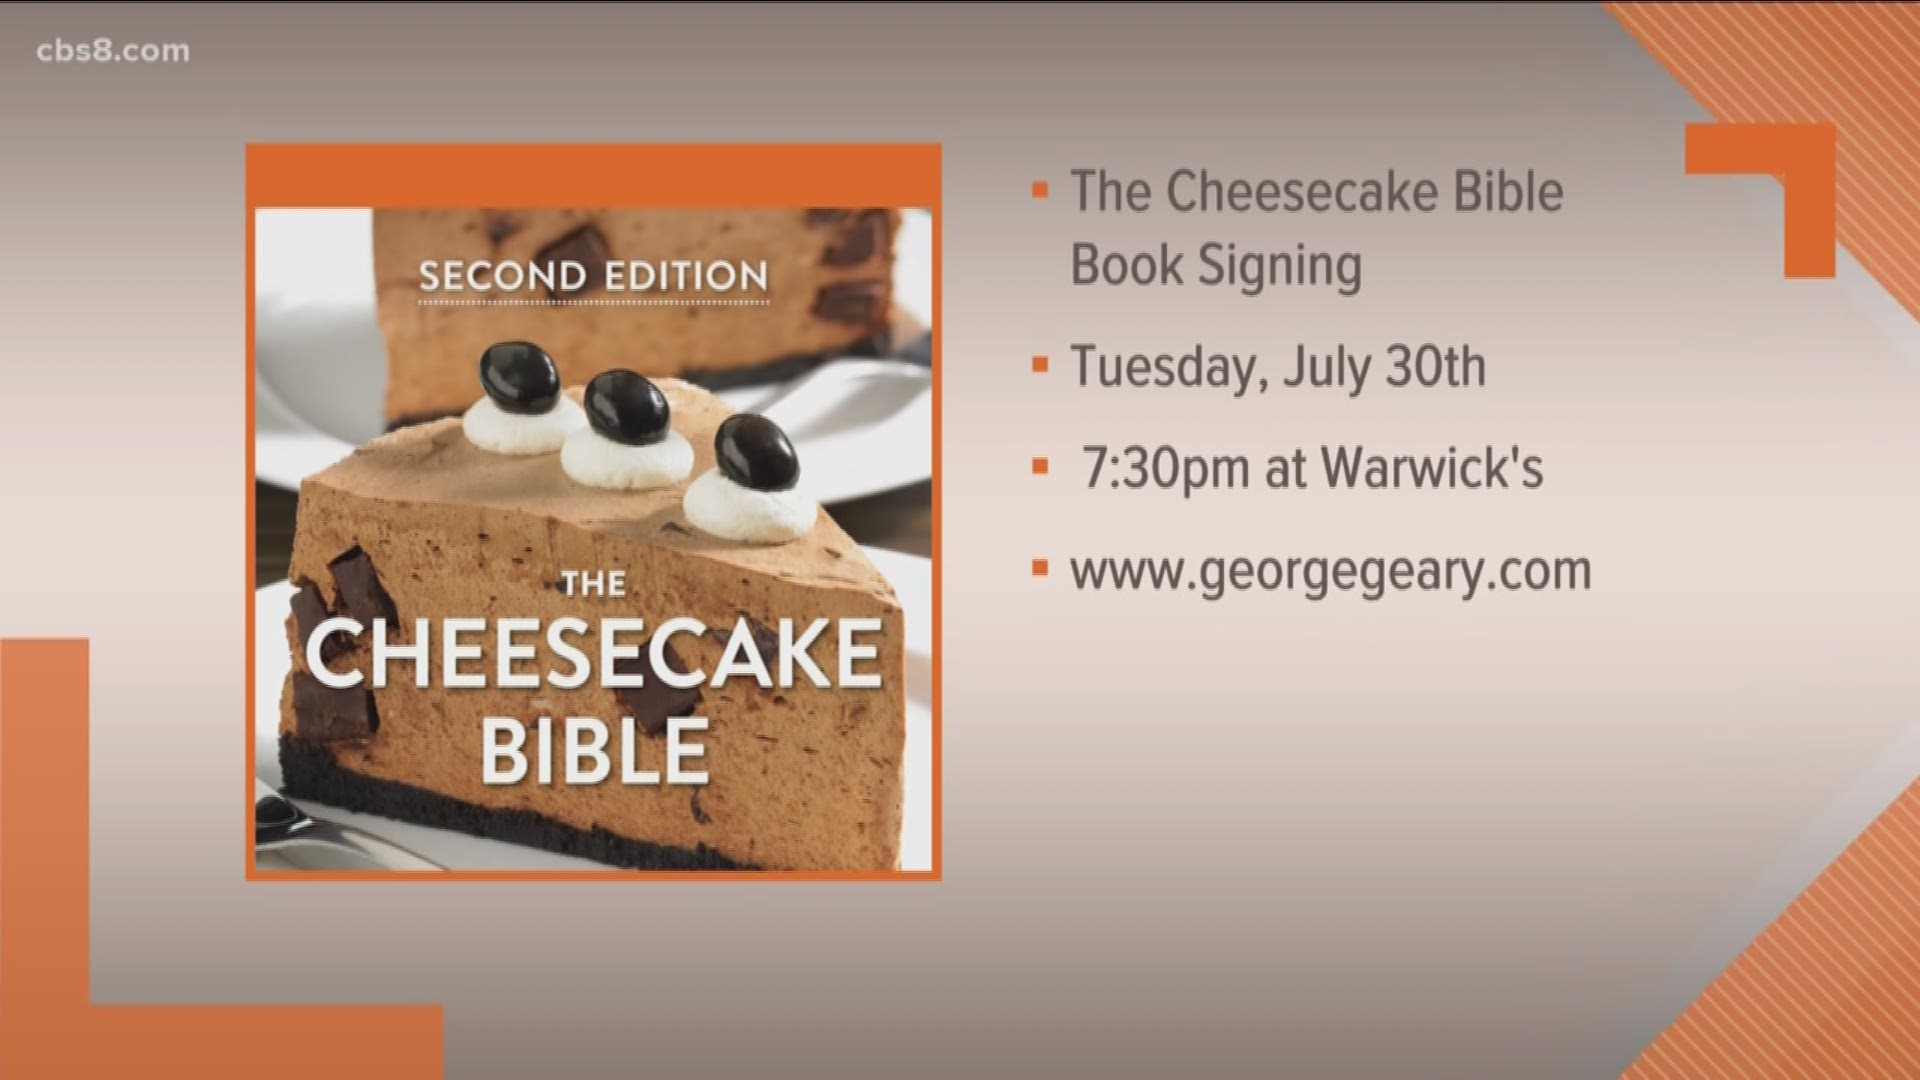 Meet Chef George Geary at 'The Cheesecake Bible' book signing on July 30.